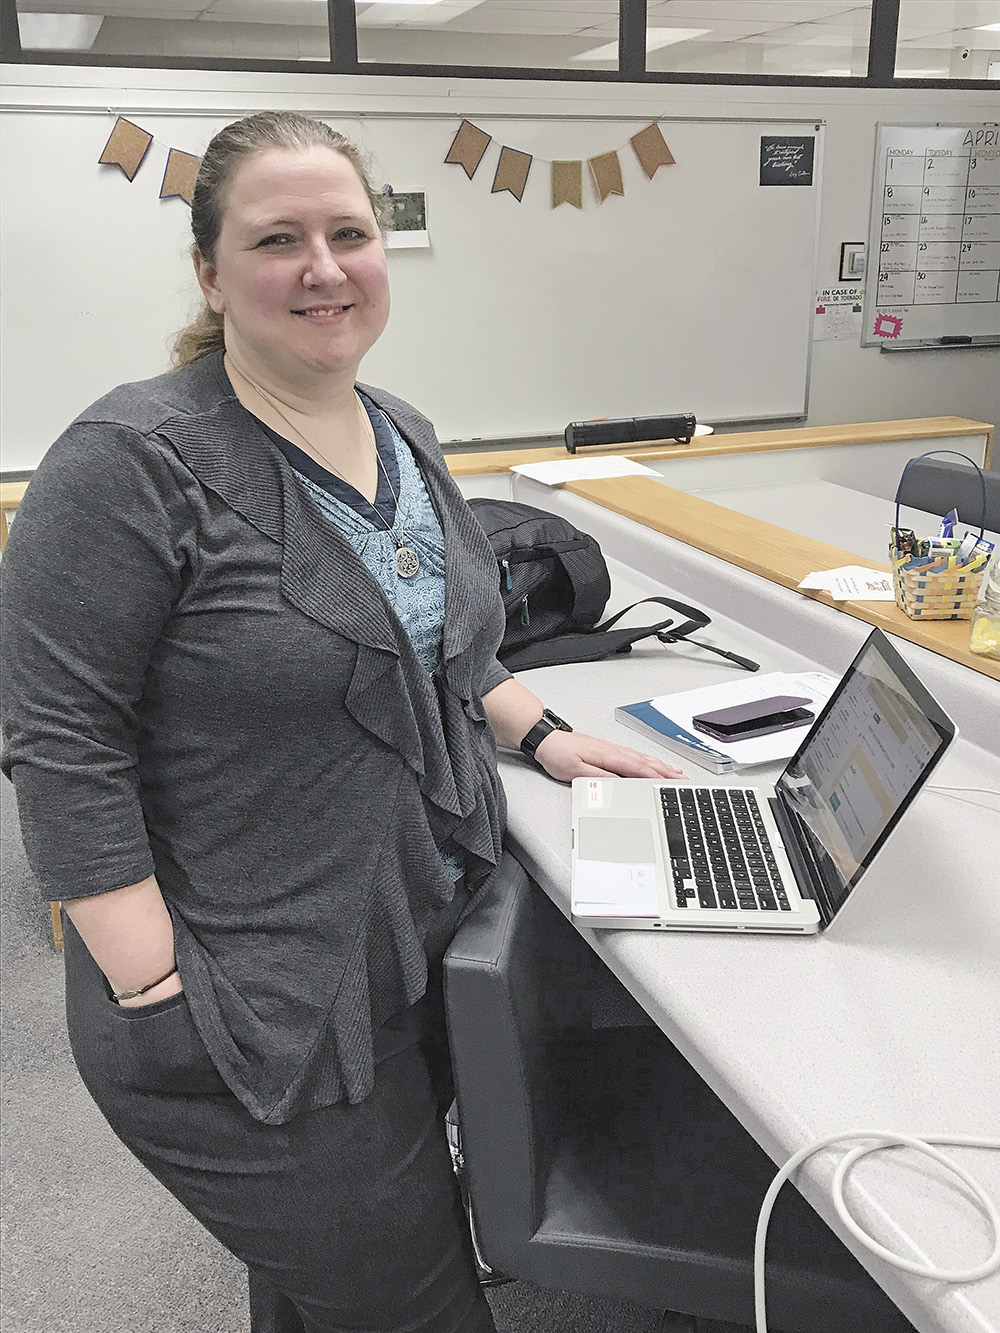 Charles City teacher will present research to American Psychological Association